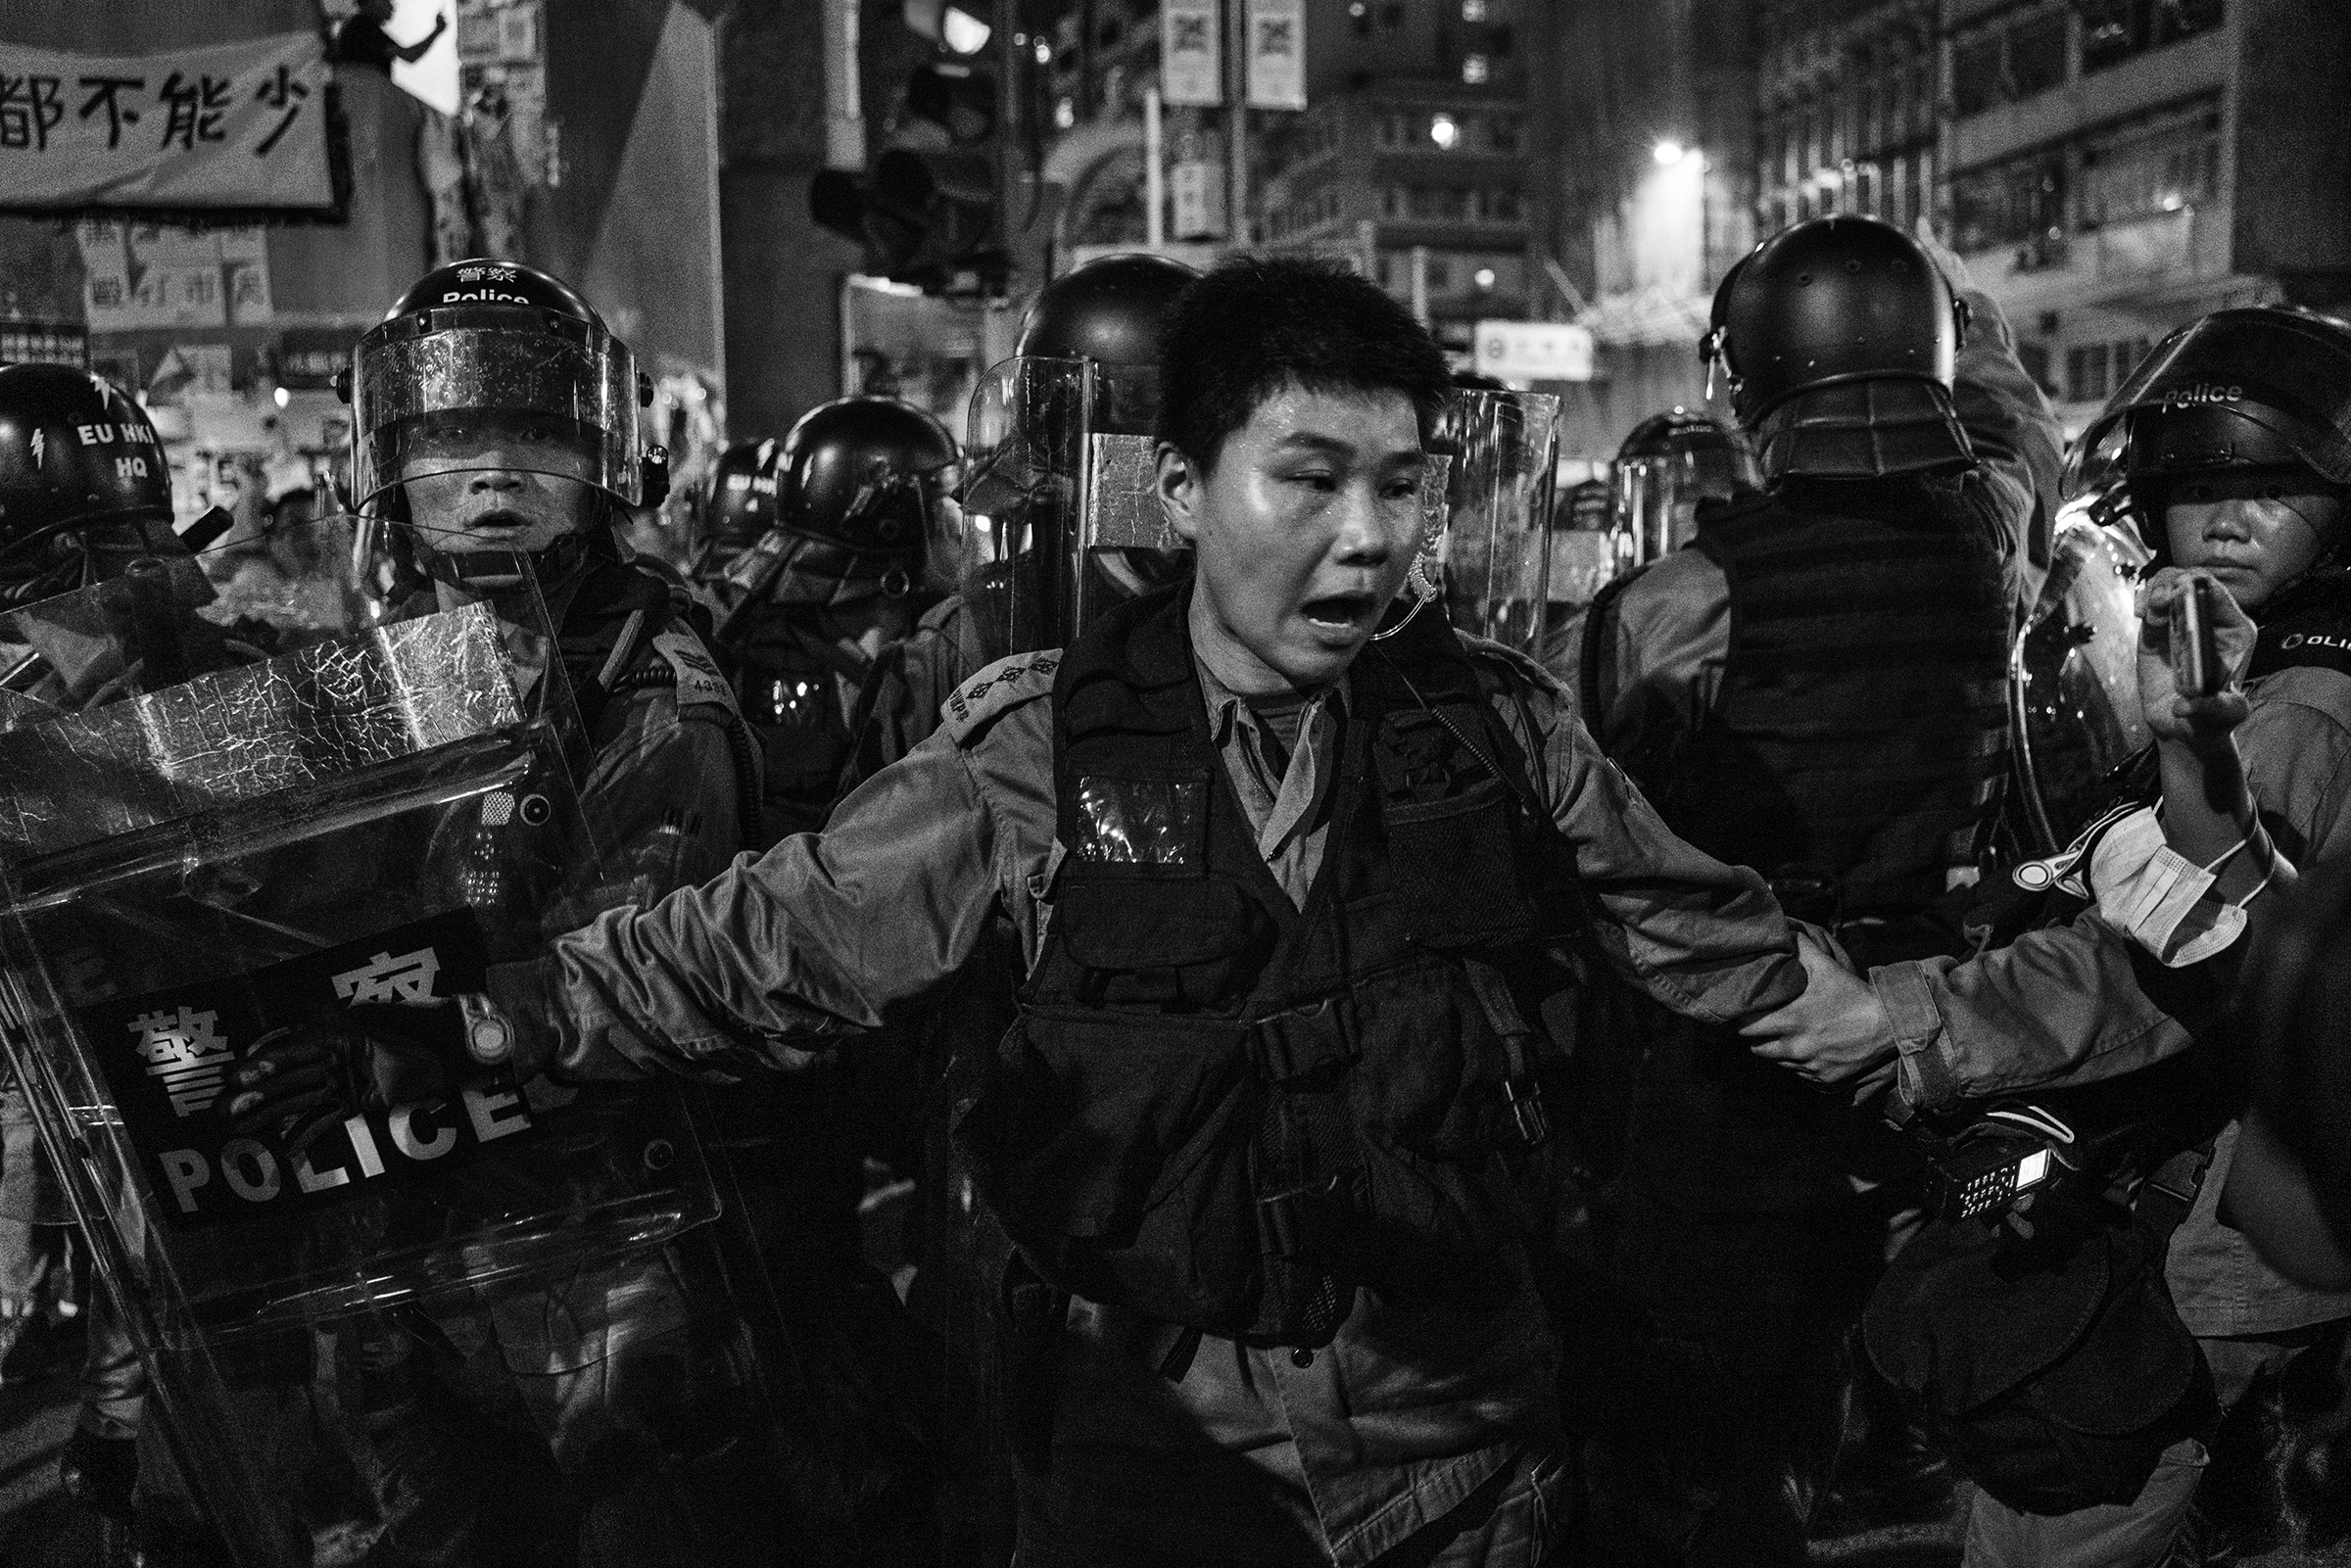 Police and local residents clash in the Sai Wan Ho area of Hong Kong on Aug. 12. (Adam Ferguson for TIME)